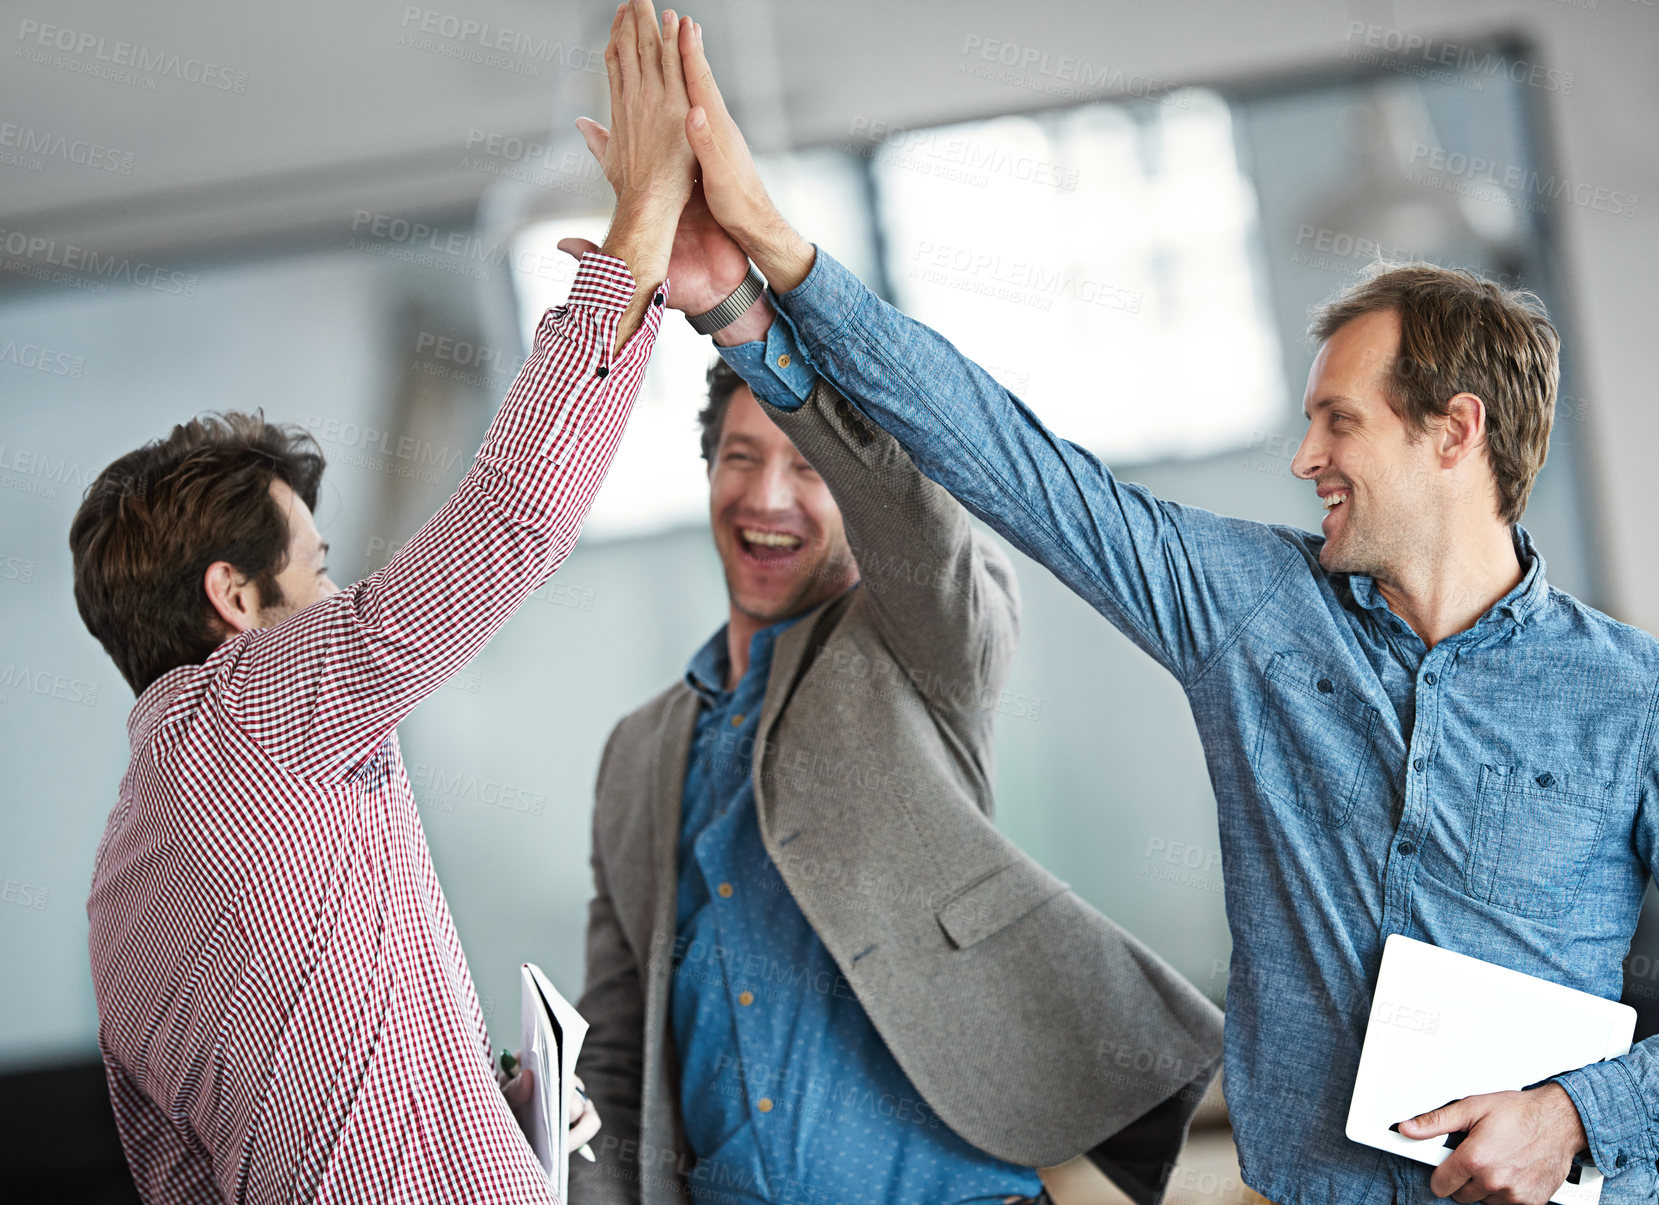 Buy stock photo Excited, cheerful and happy group of male business people high fiving for motivation in an office. Group of professional work colleagues show support and celebrating after a team building meeting.